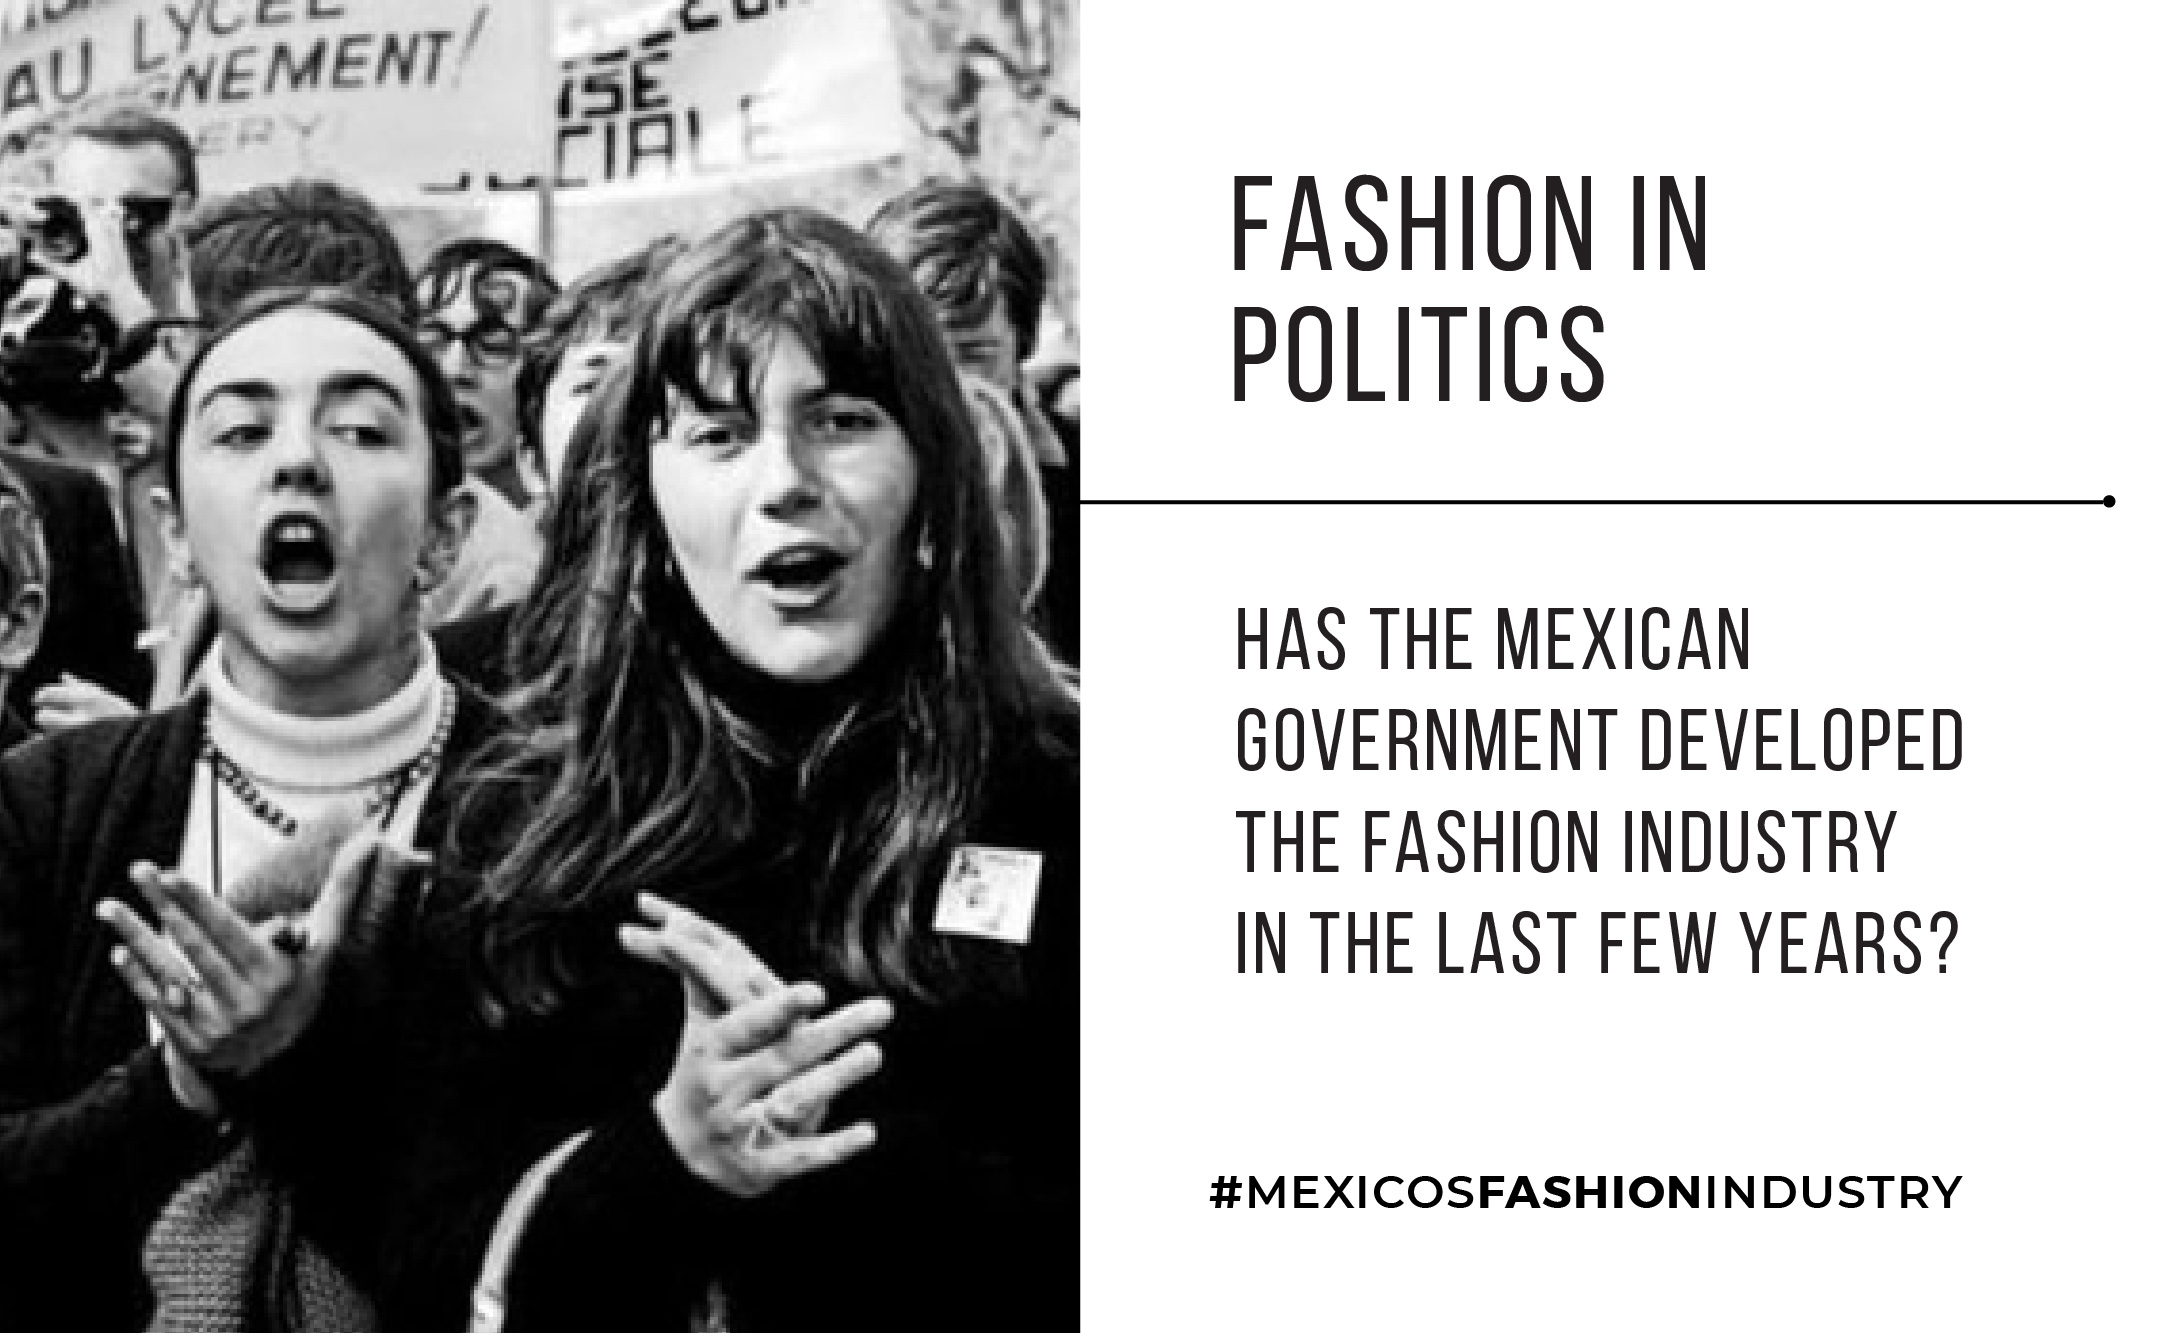 Fashion in Politics: Has the Mexican Government developed the fashion industry in the last few years?